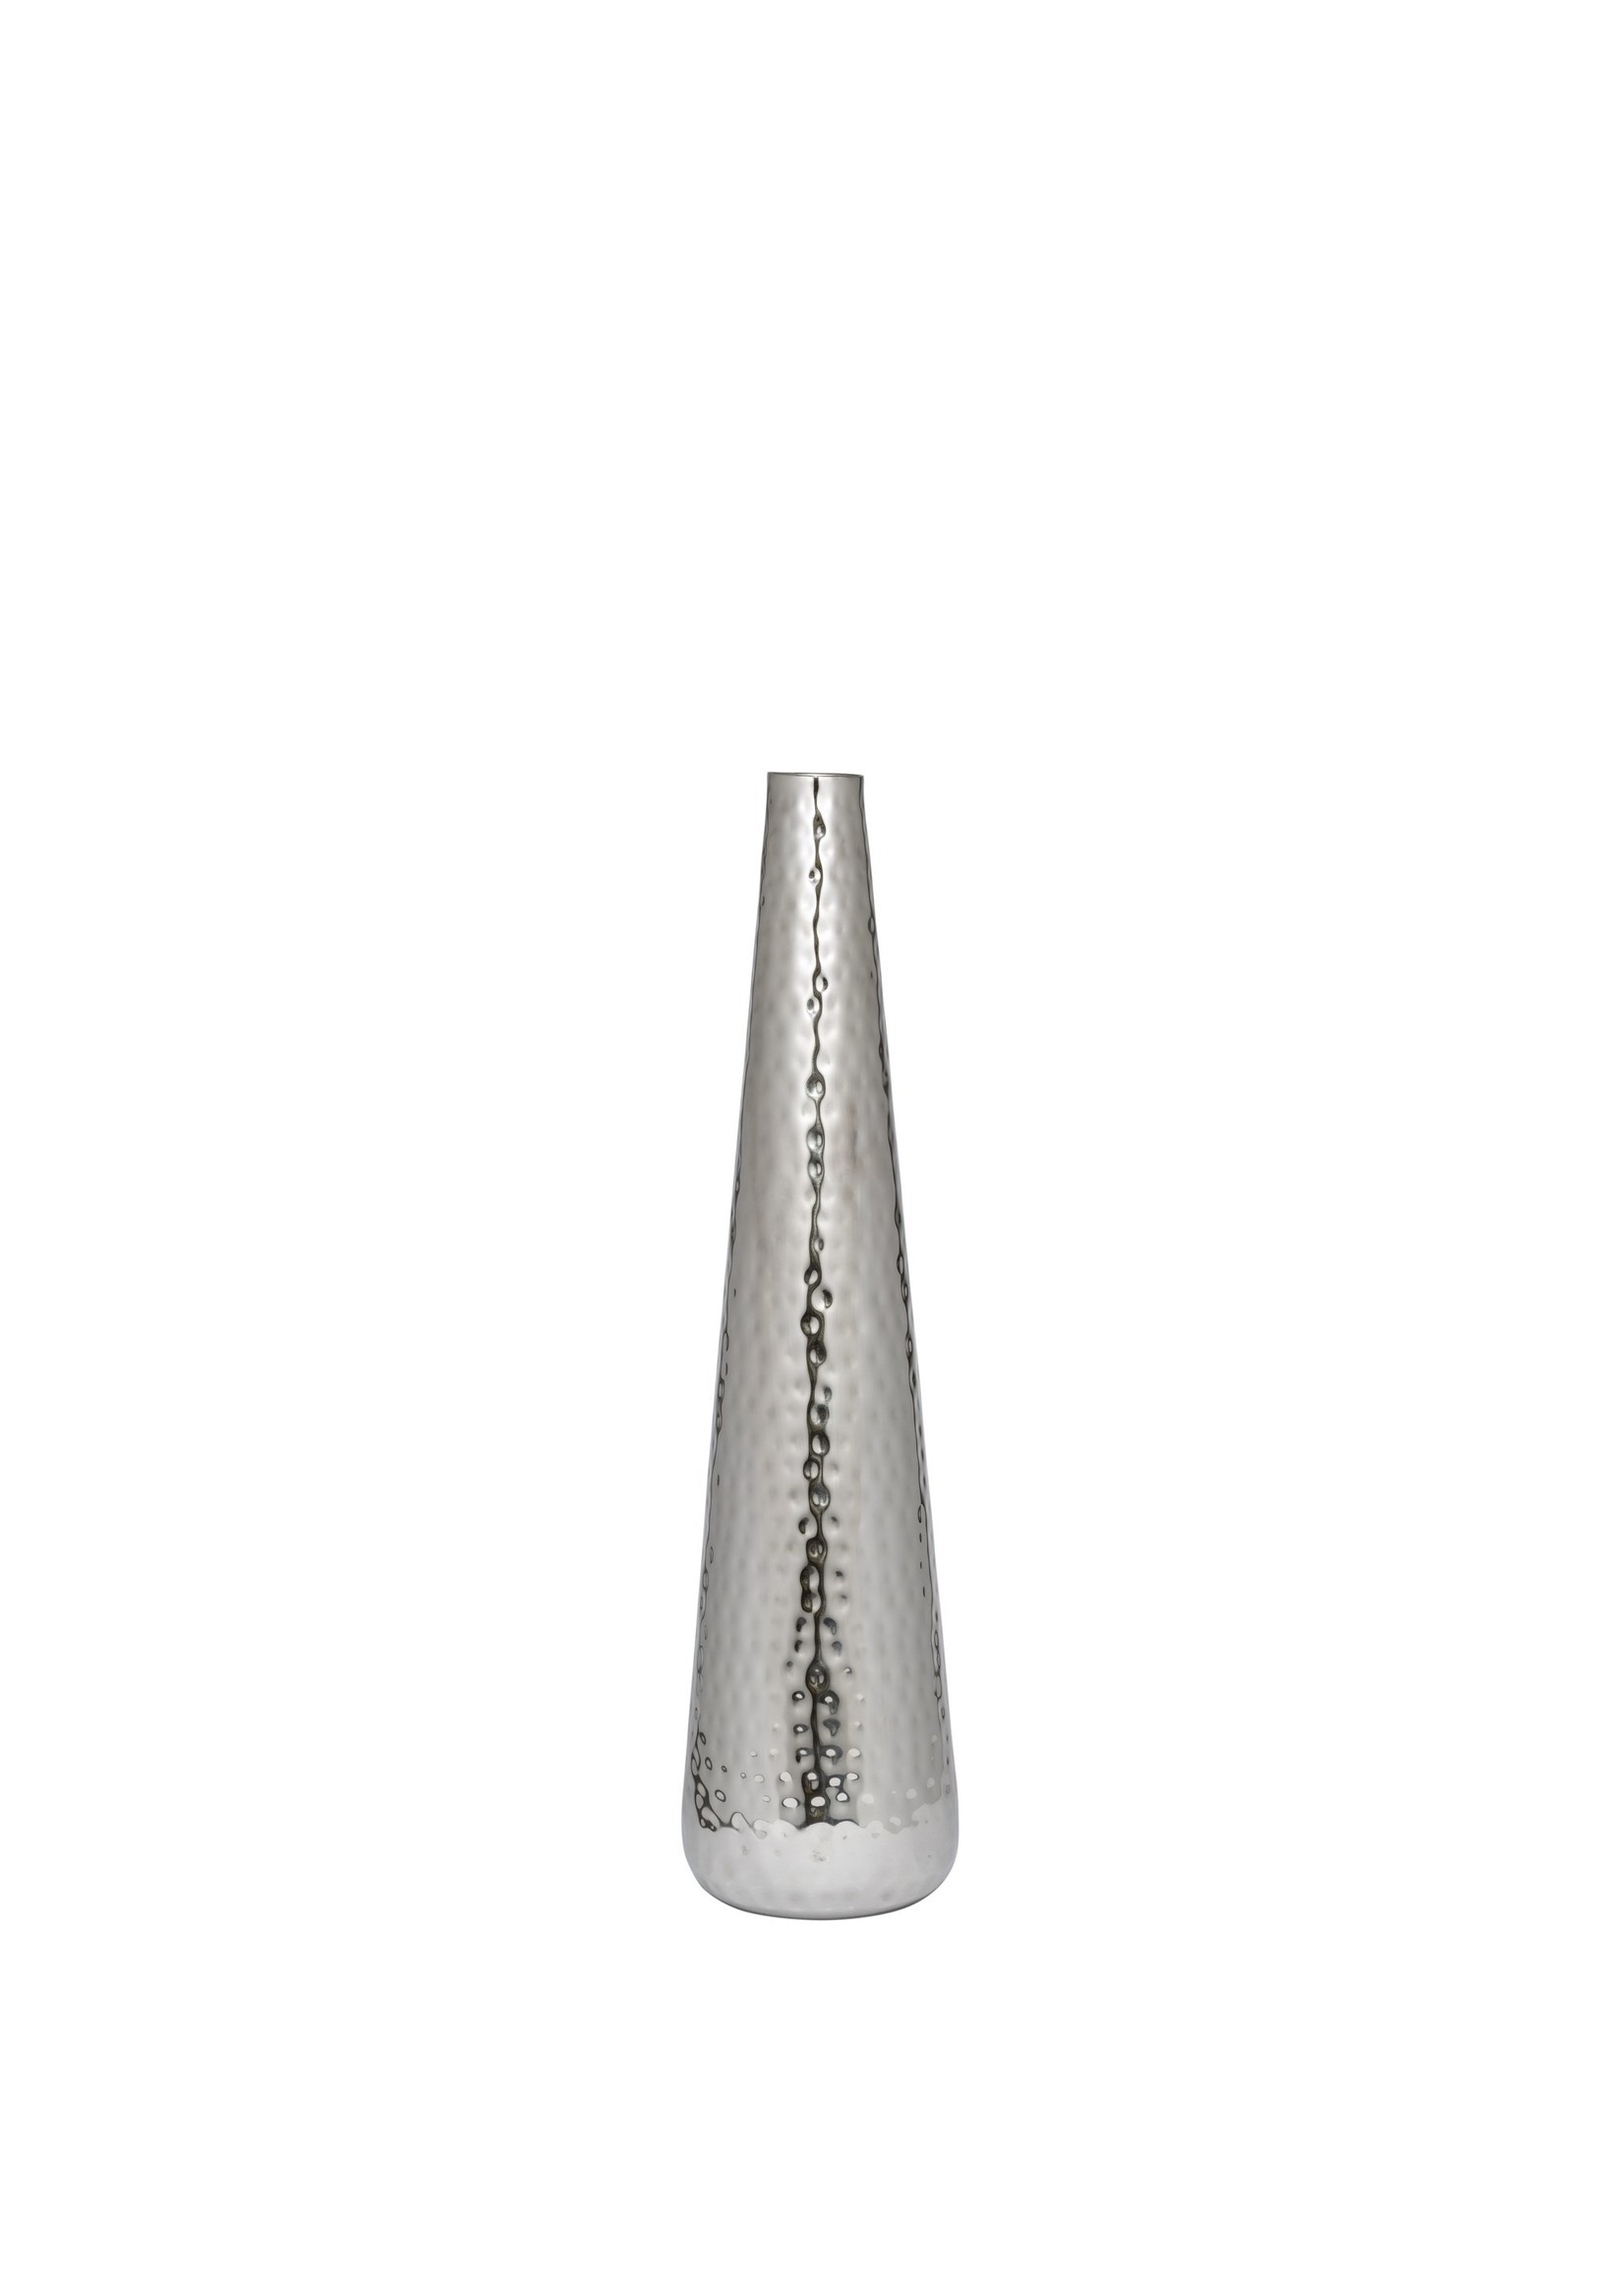 Torre & Tagus Canto Hammered Aluminum Vase - 25.5"